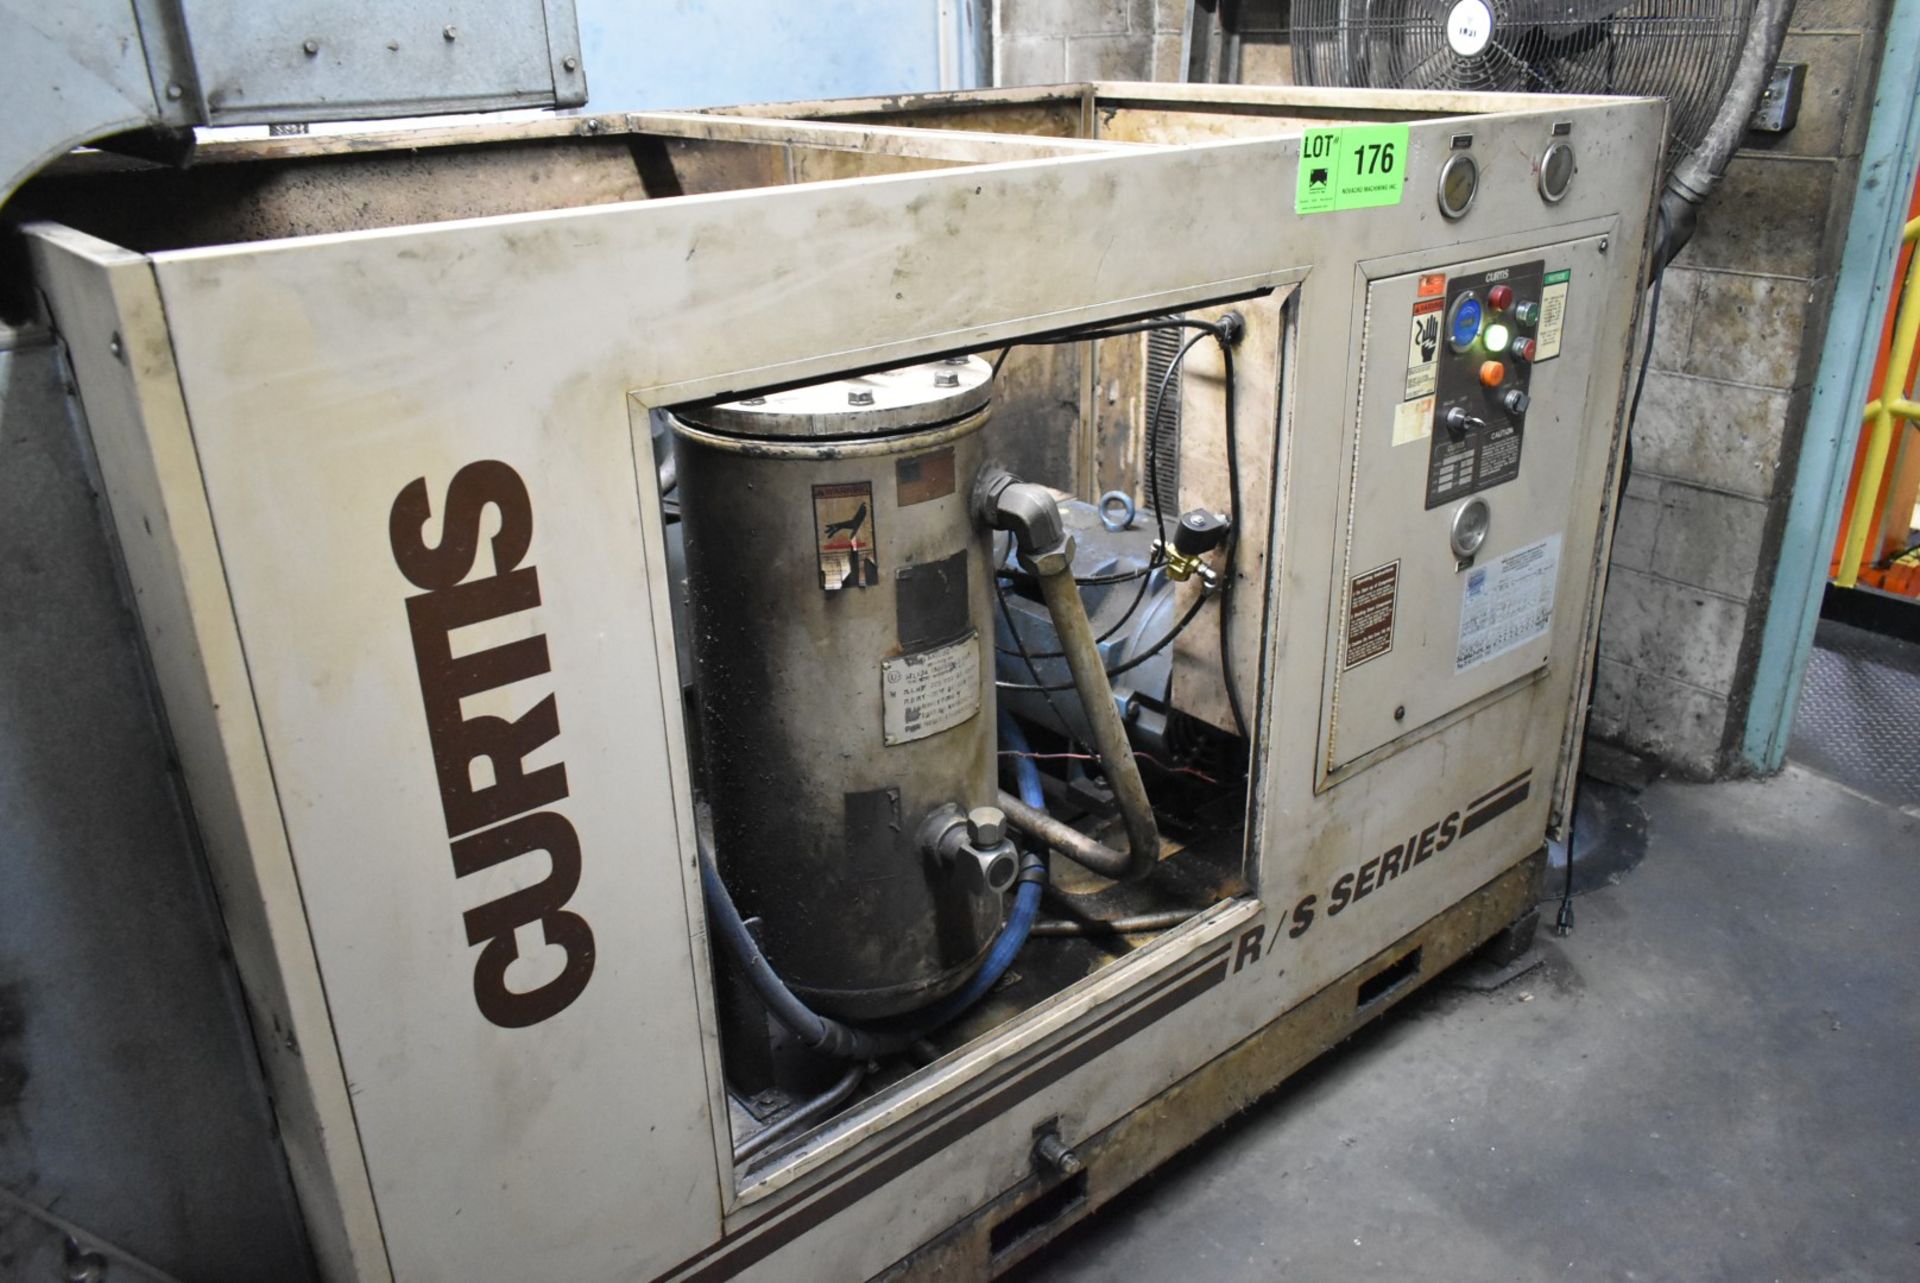 CURTIS R/S 50 50 HP ROTARY SCREW AIR COMPRESSOR WITH 212 CFM, 125 PSI, S/N: 7085G01016 - Image 2 of 4